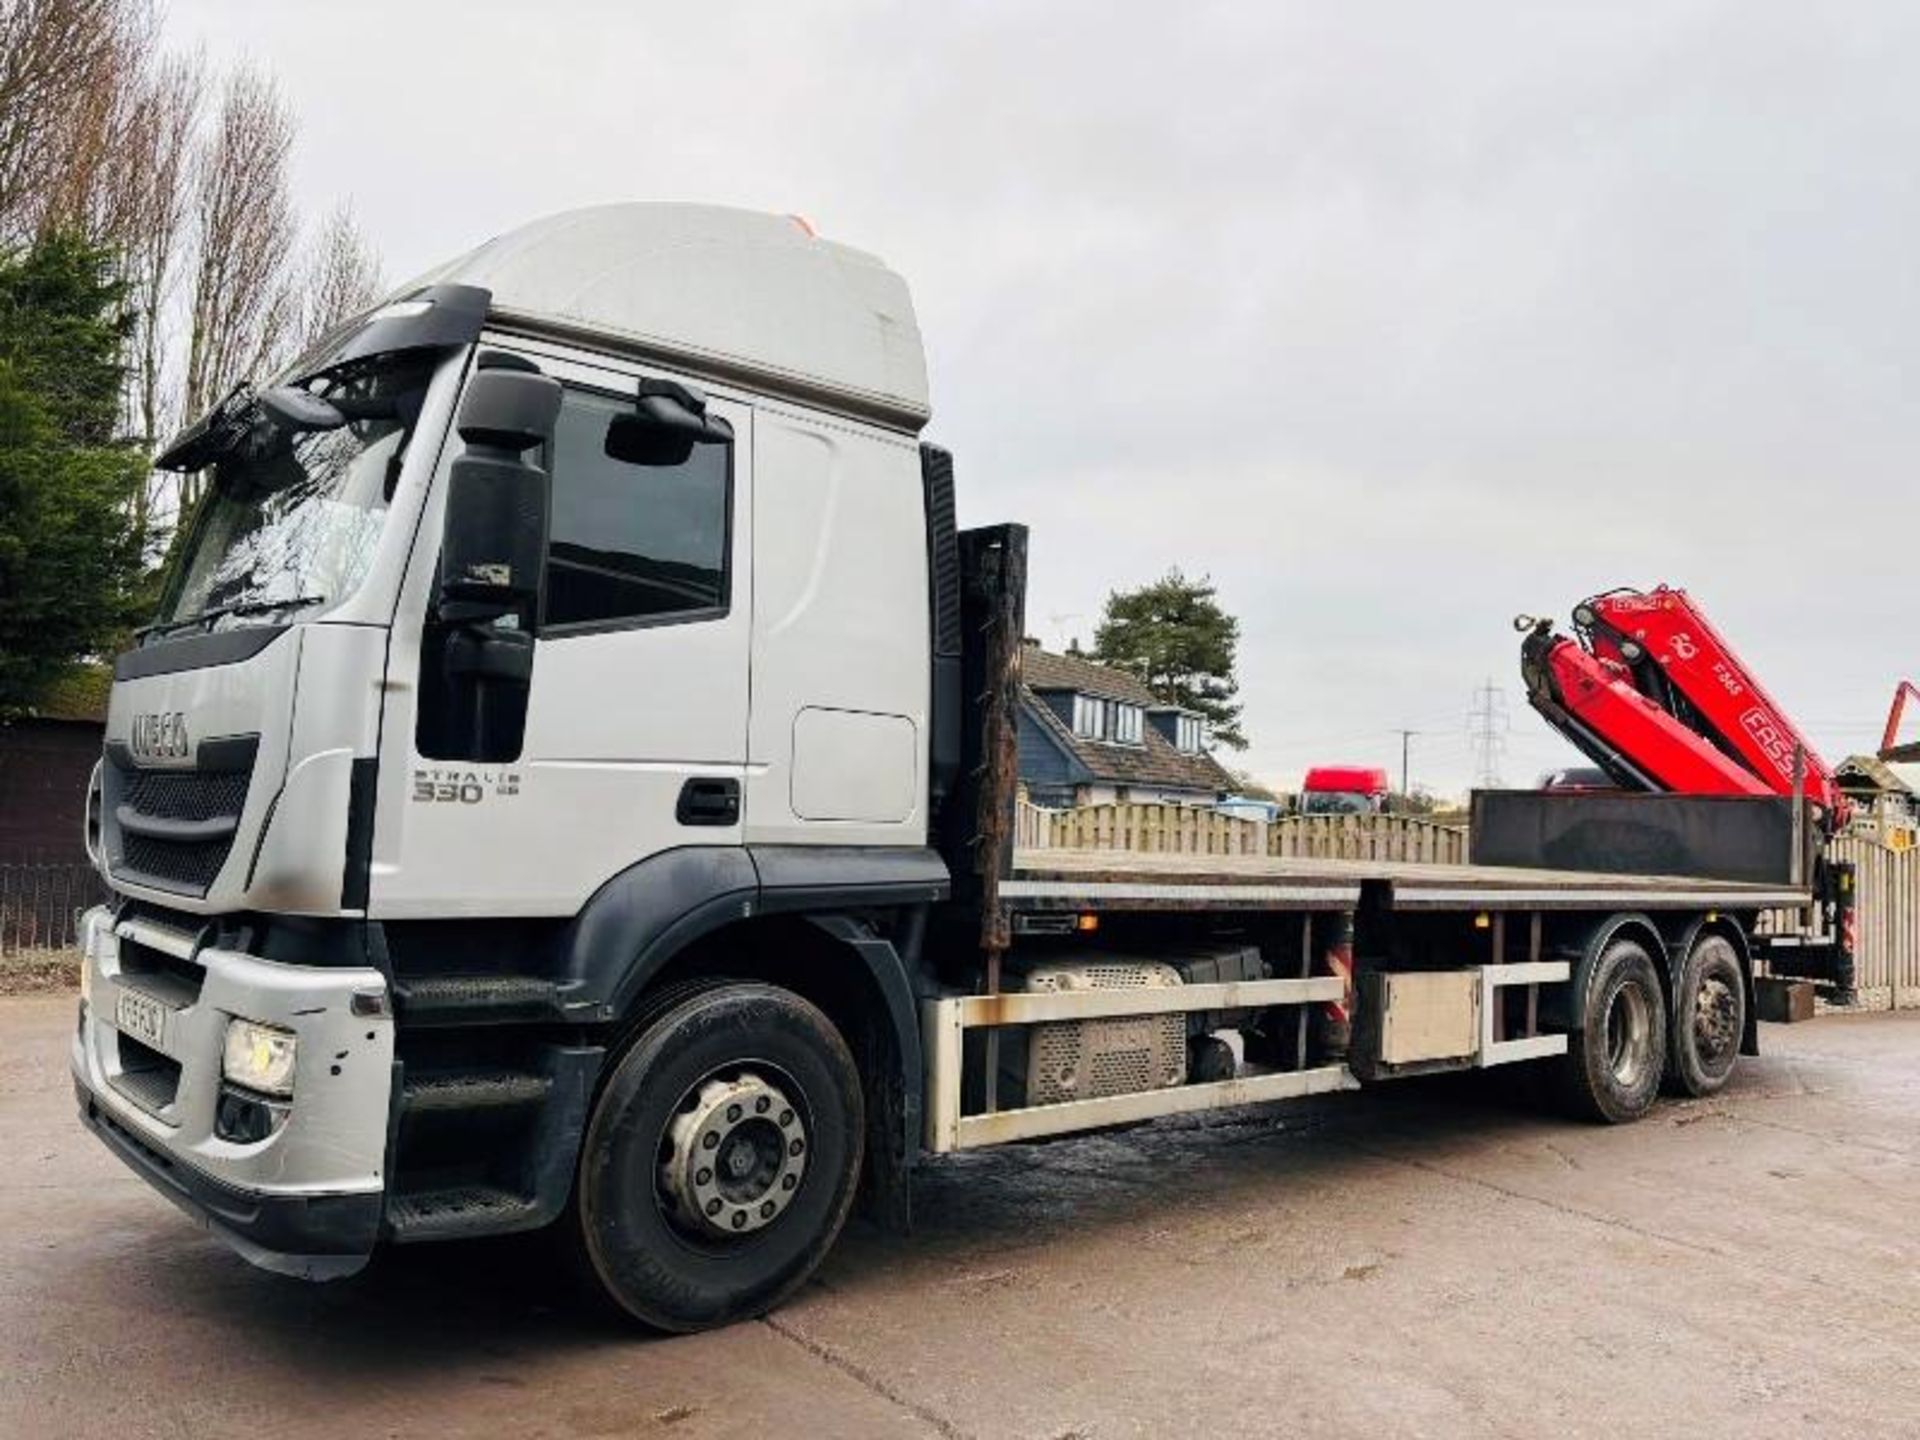 IVECO STRALIS 330E6 HIGHWAY SLEEPER 6X2 *YEAR 2015, CRANE NOT INCLUDED*